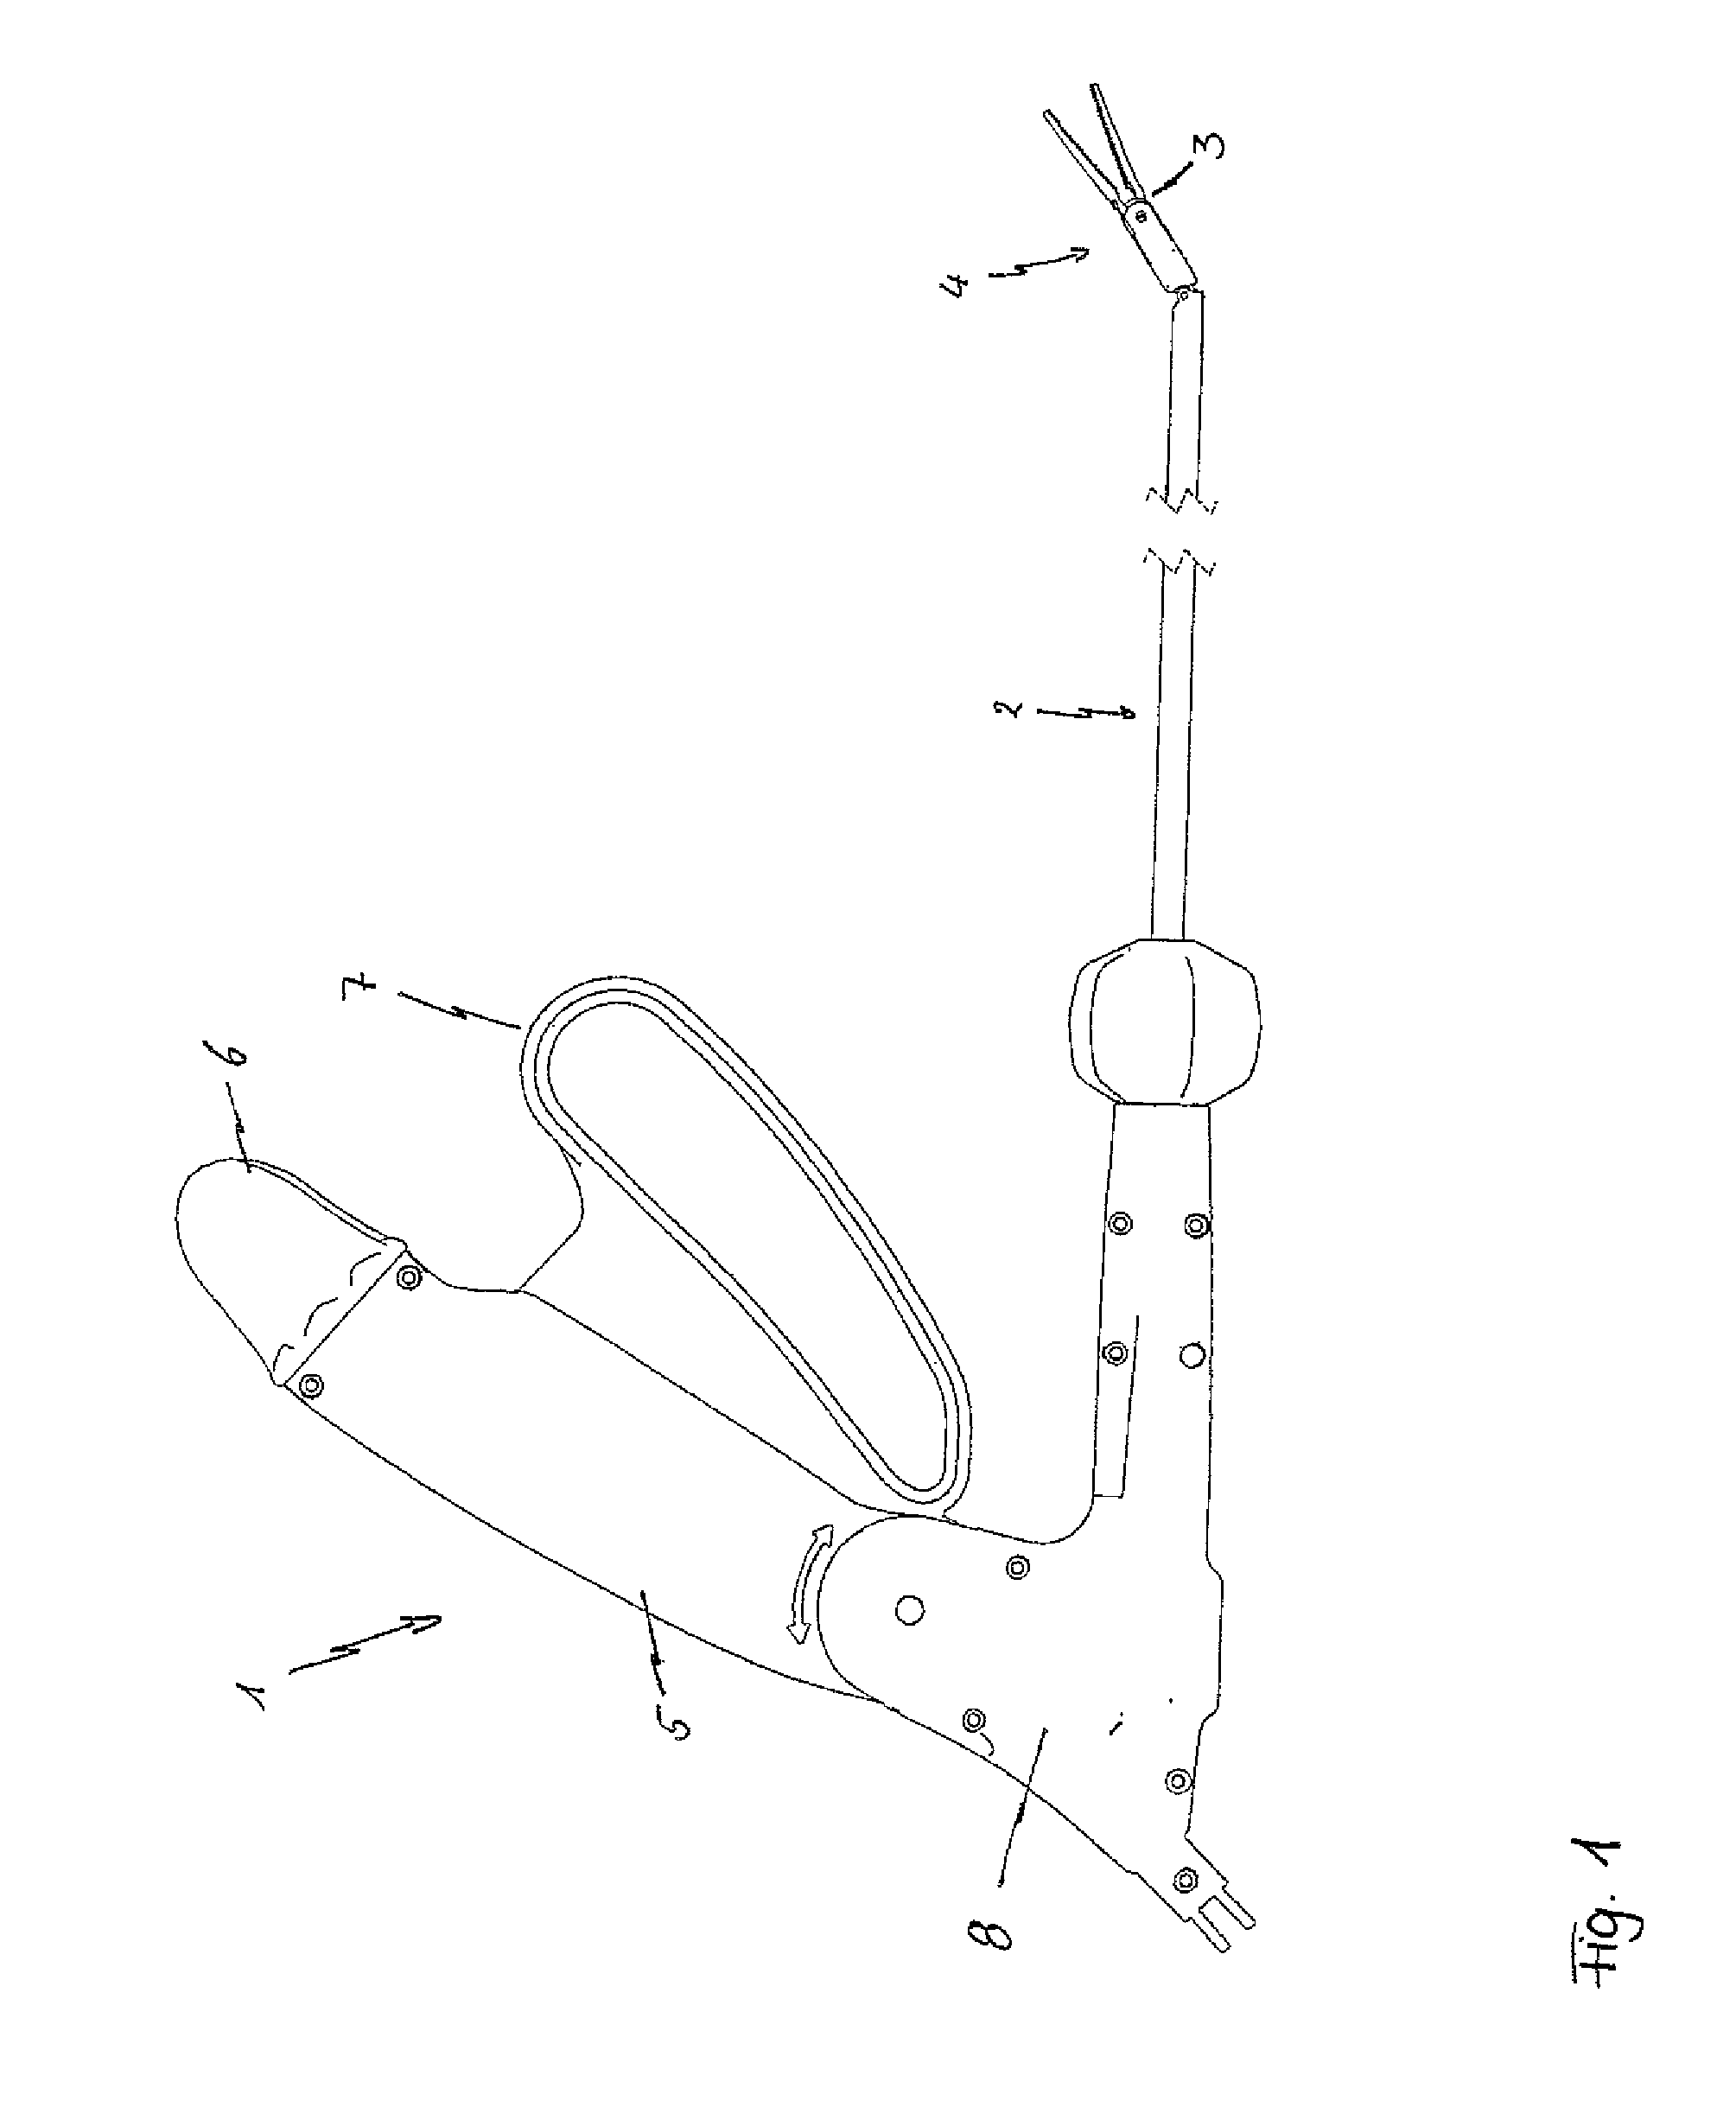 Surgical instrument with elastically movable instrument head